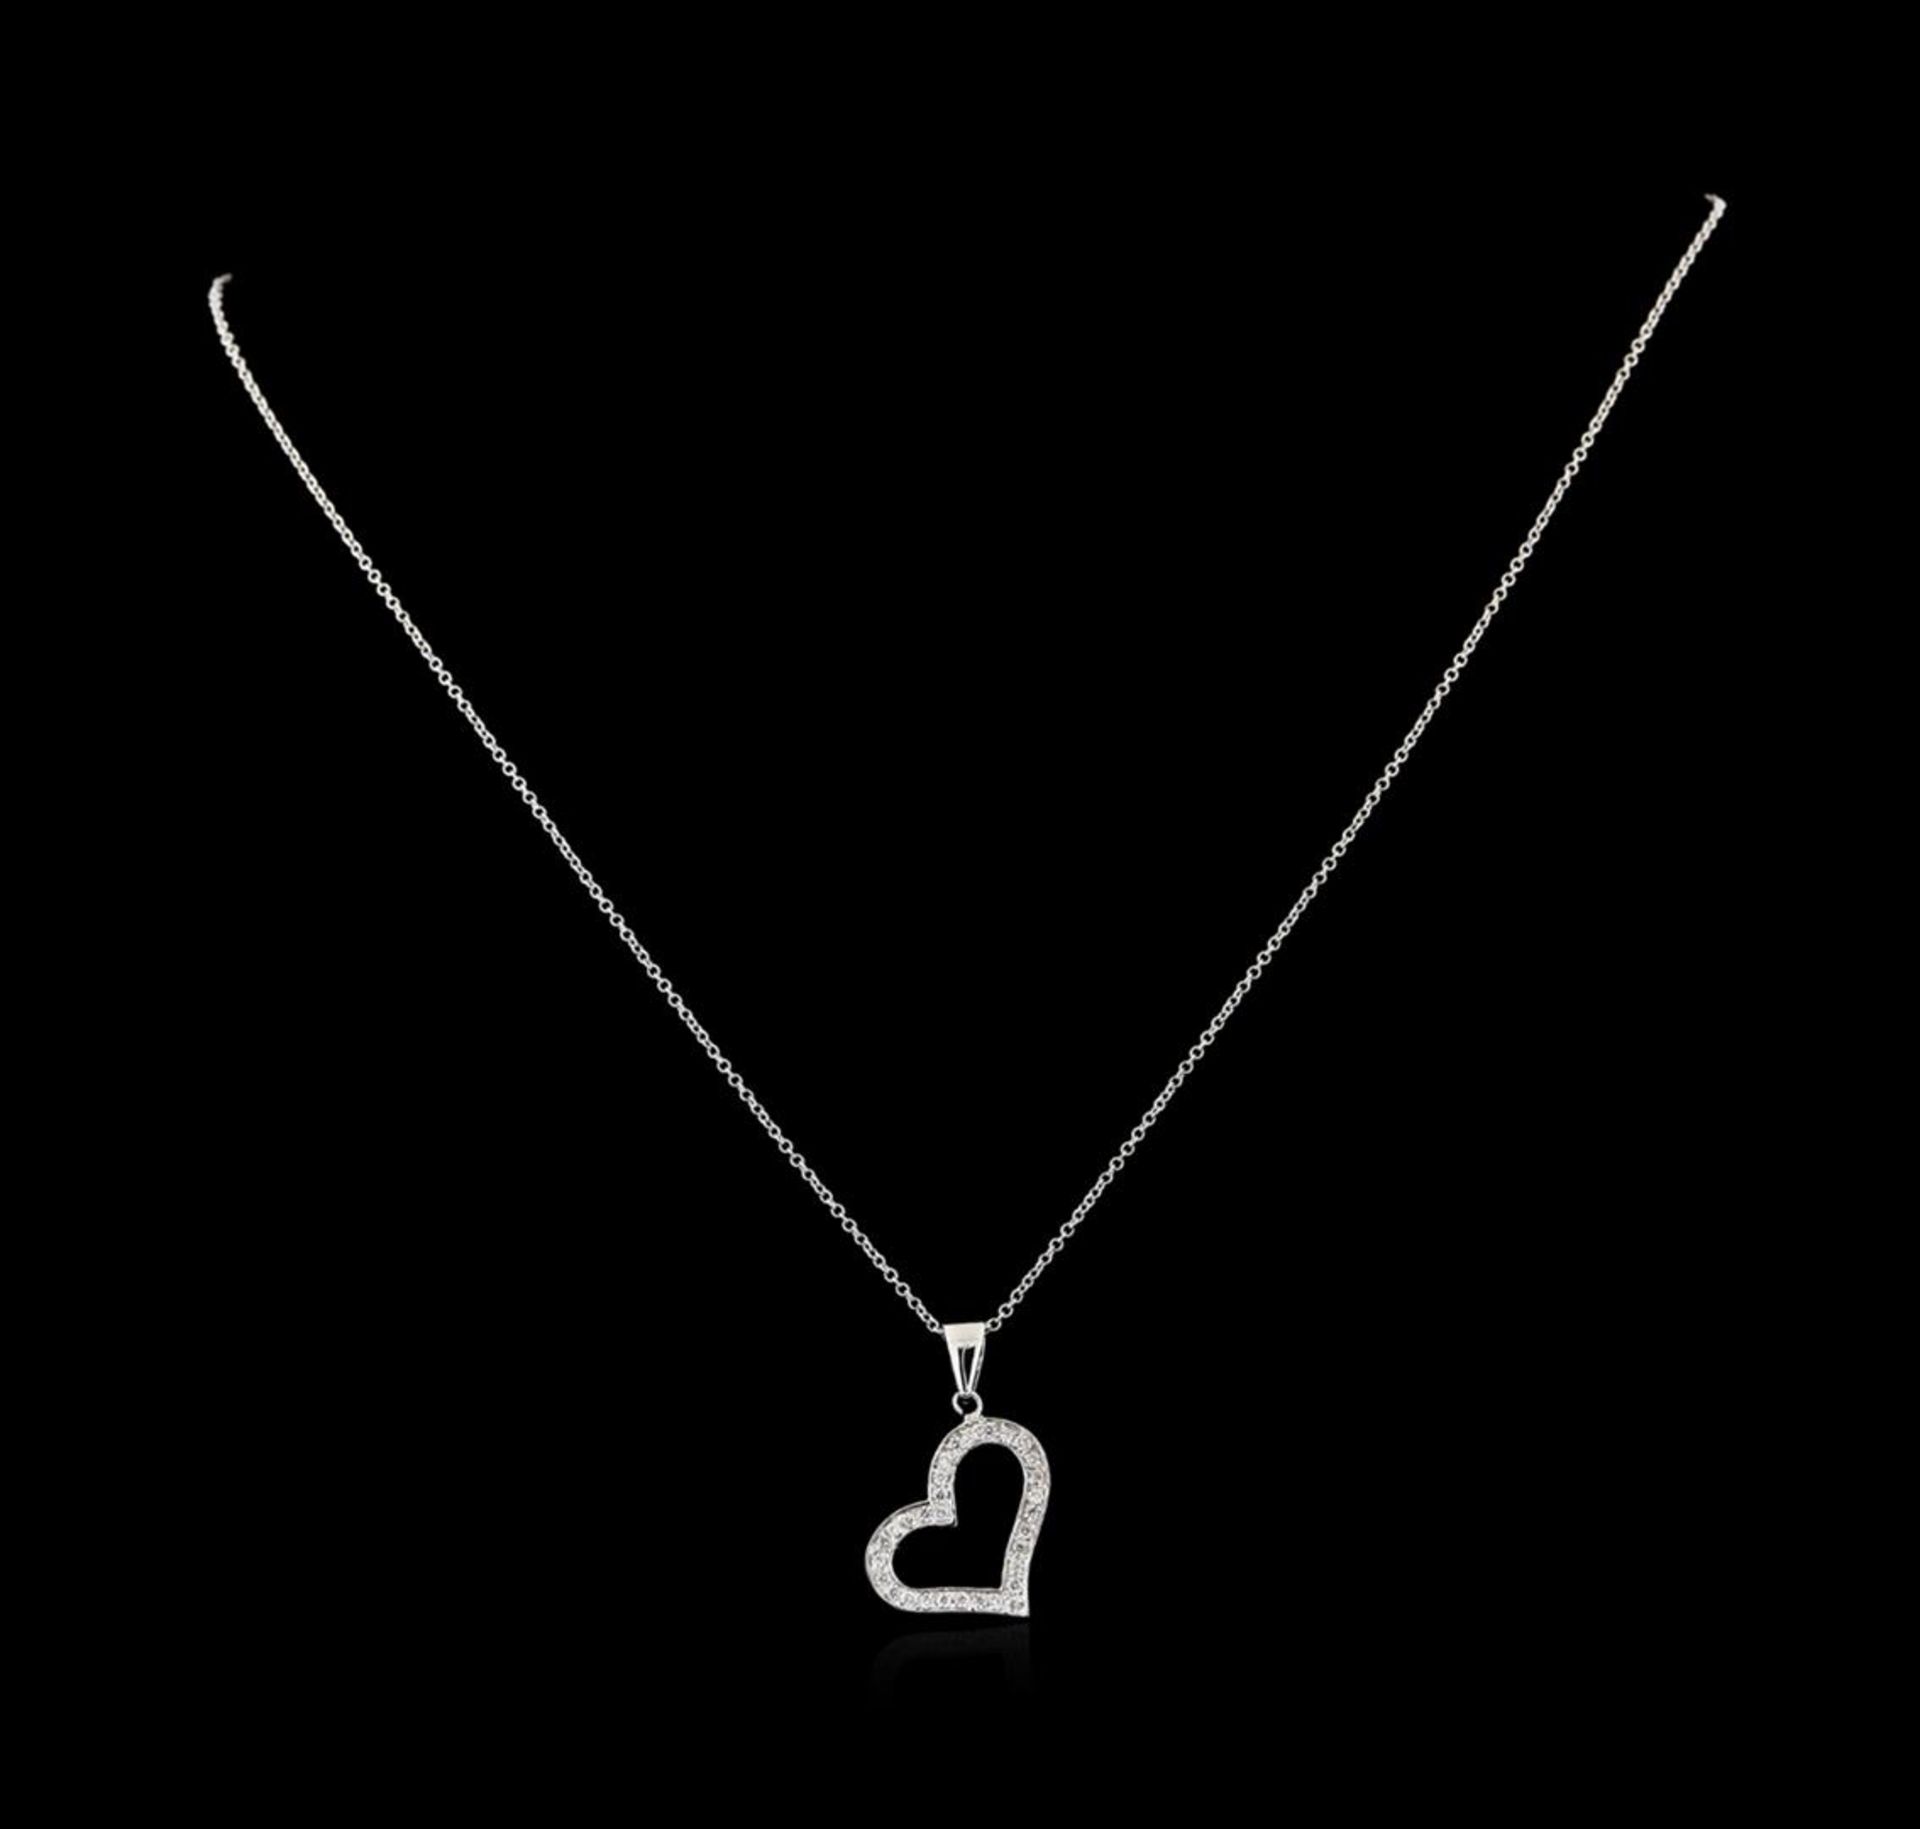 0.31 ctw Diamond Pendant With Chain - 14KT White Gold - Image 2 of 2